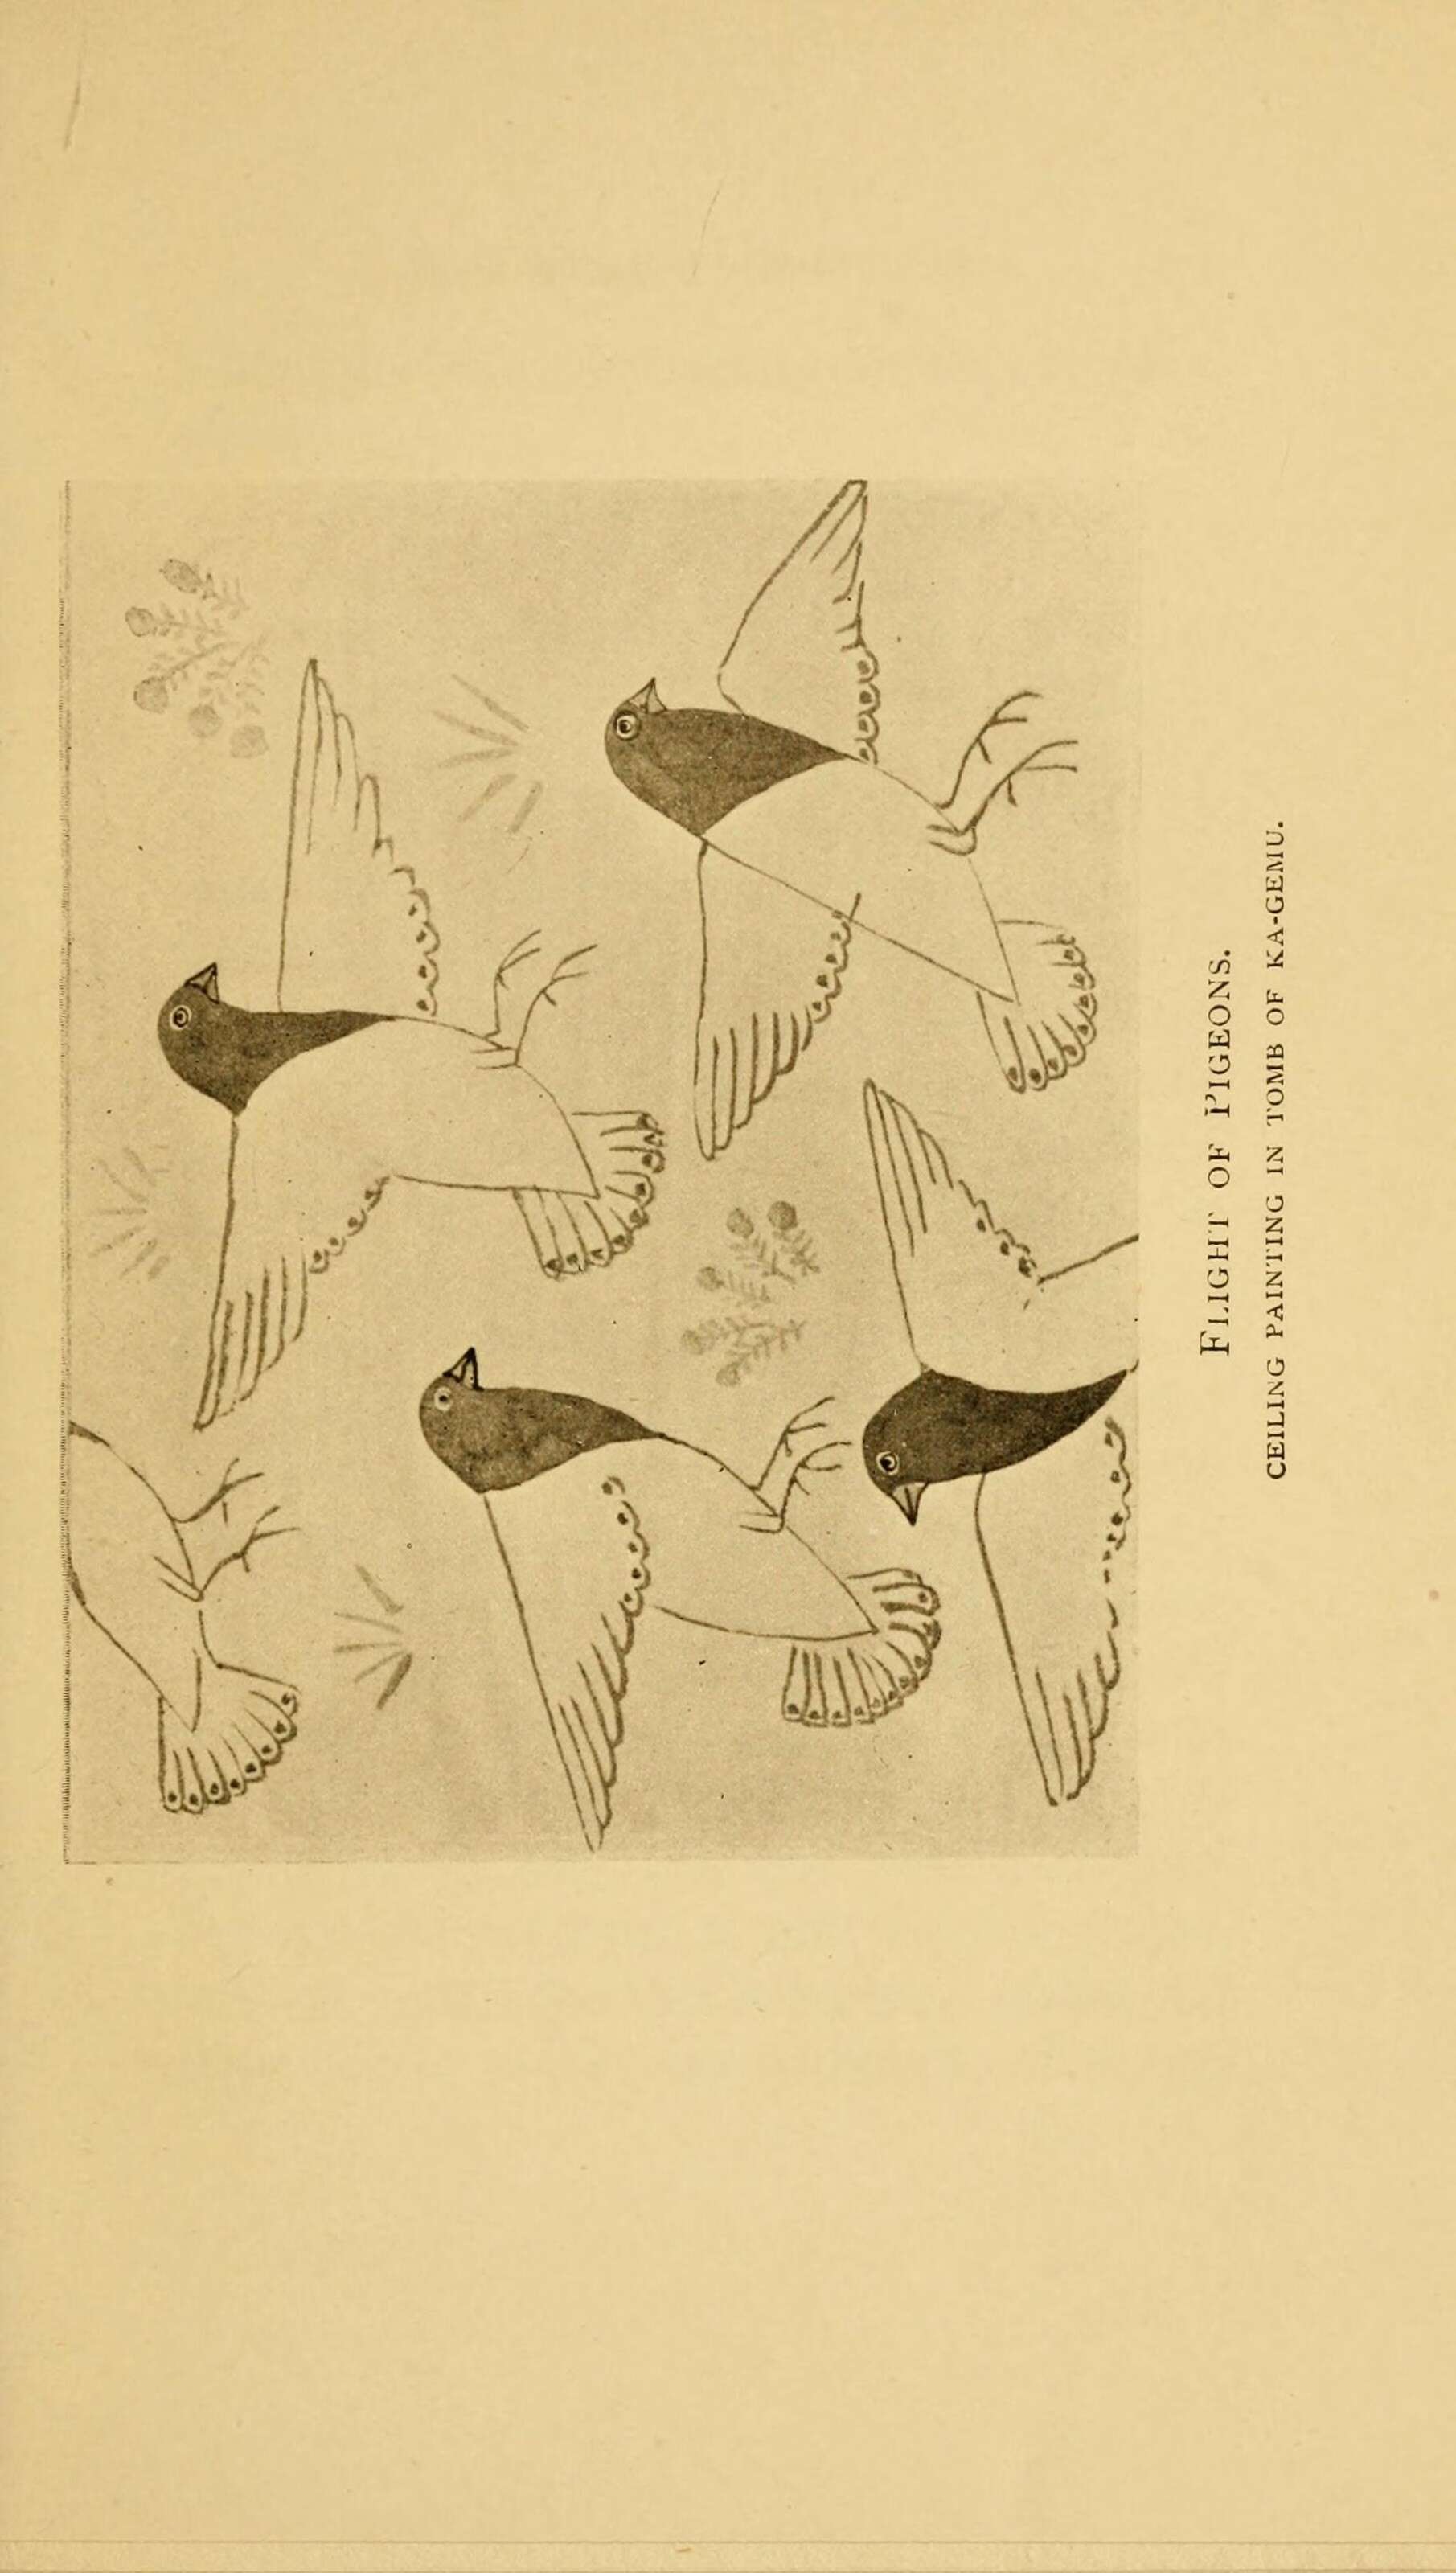 Image of doves